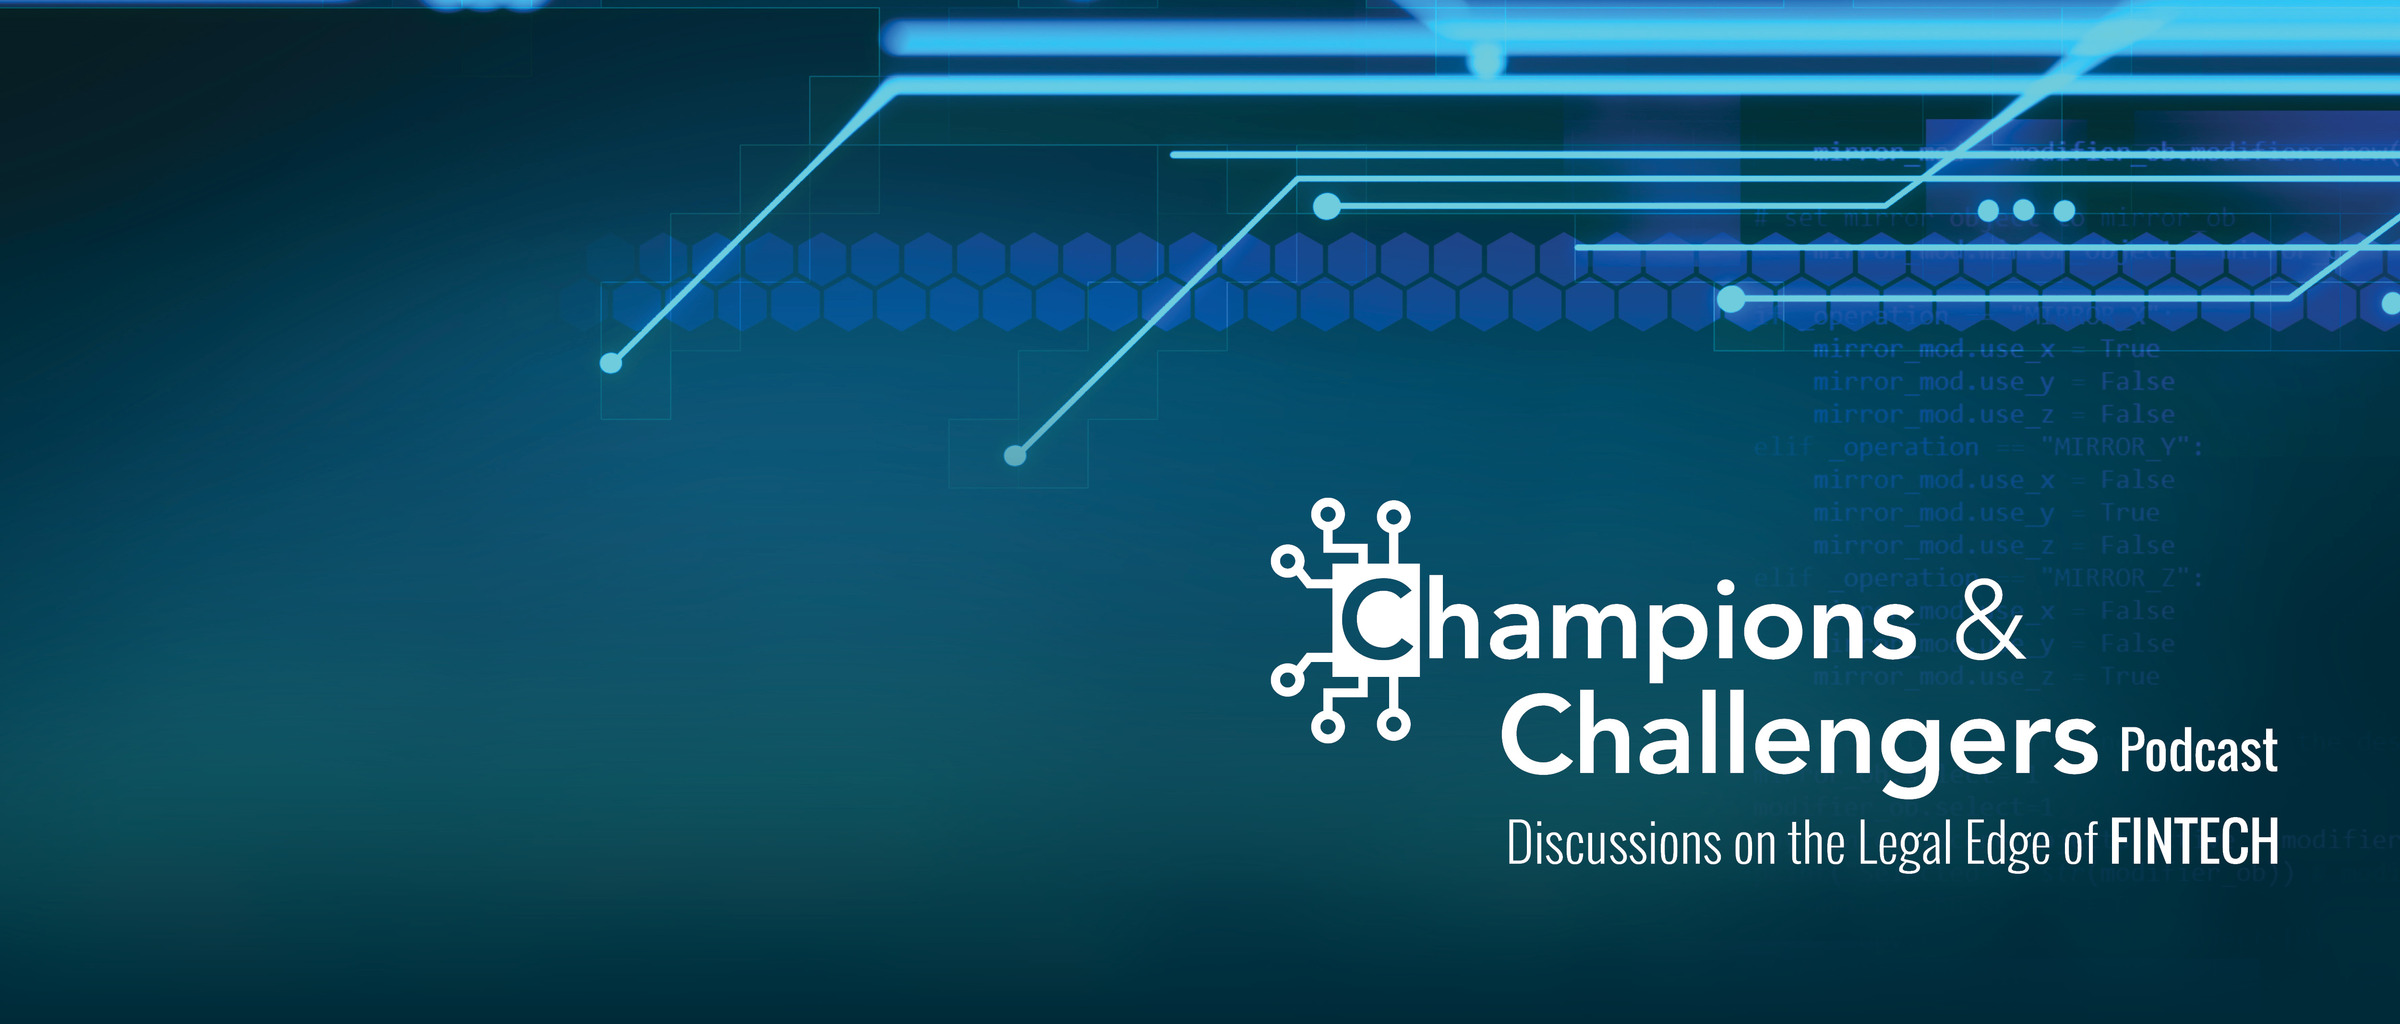 Champions & Challengers A Podcast; Discussions on the Legal Edge of FINTECH